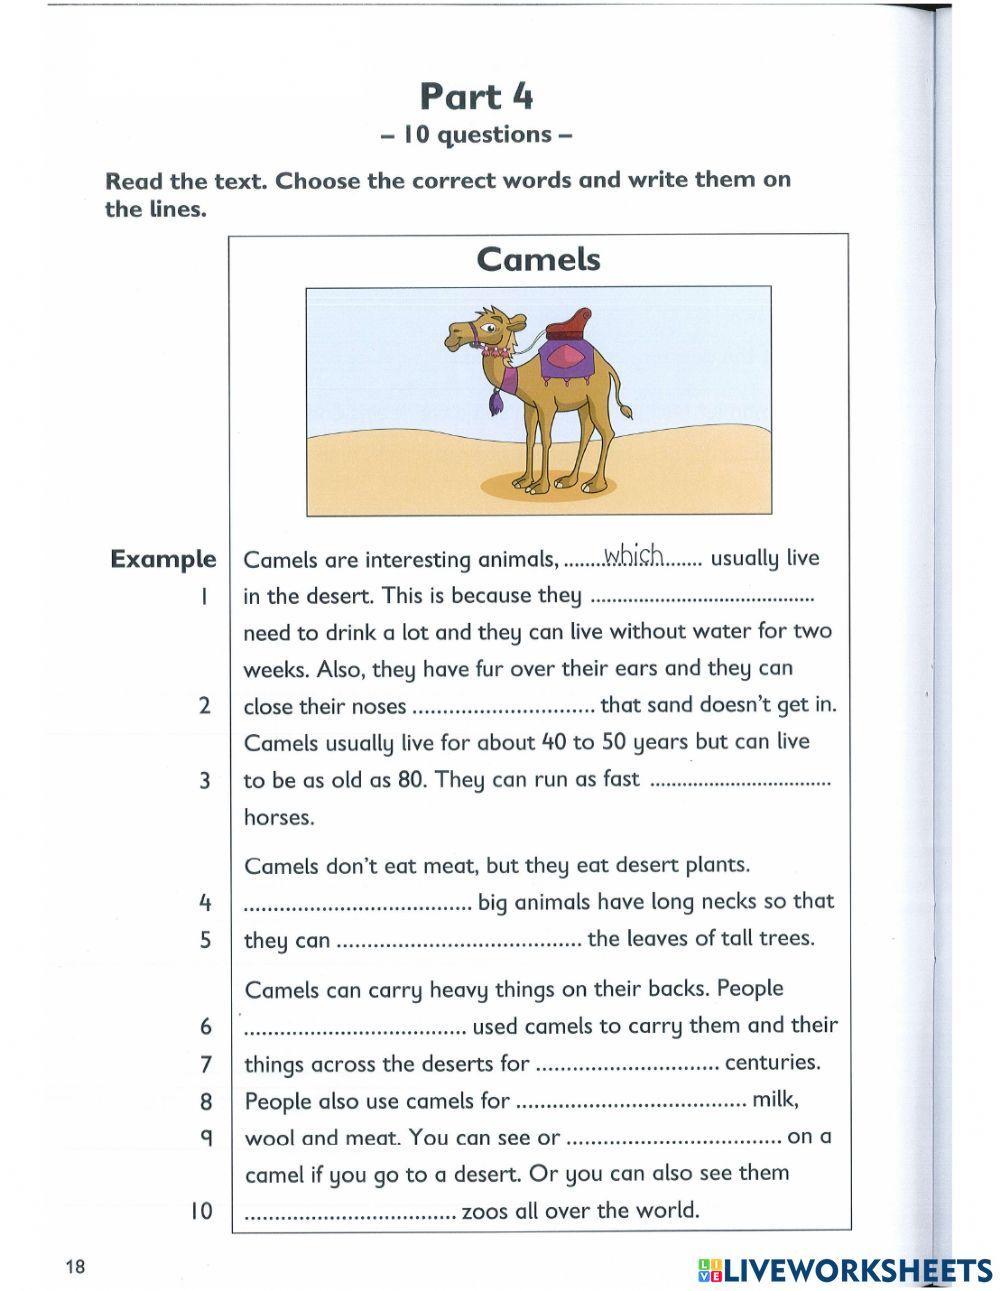 A2 Flyers practices test Reading and Writing part 4